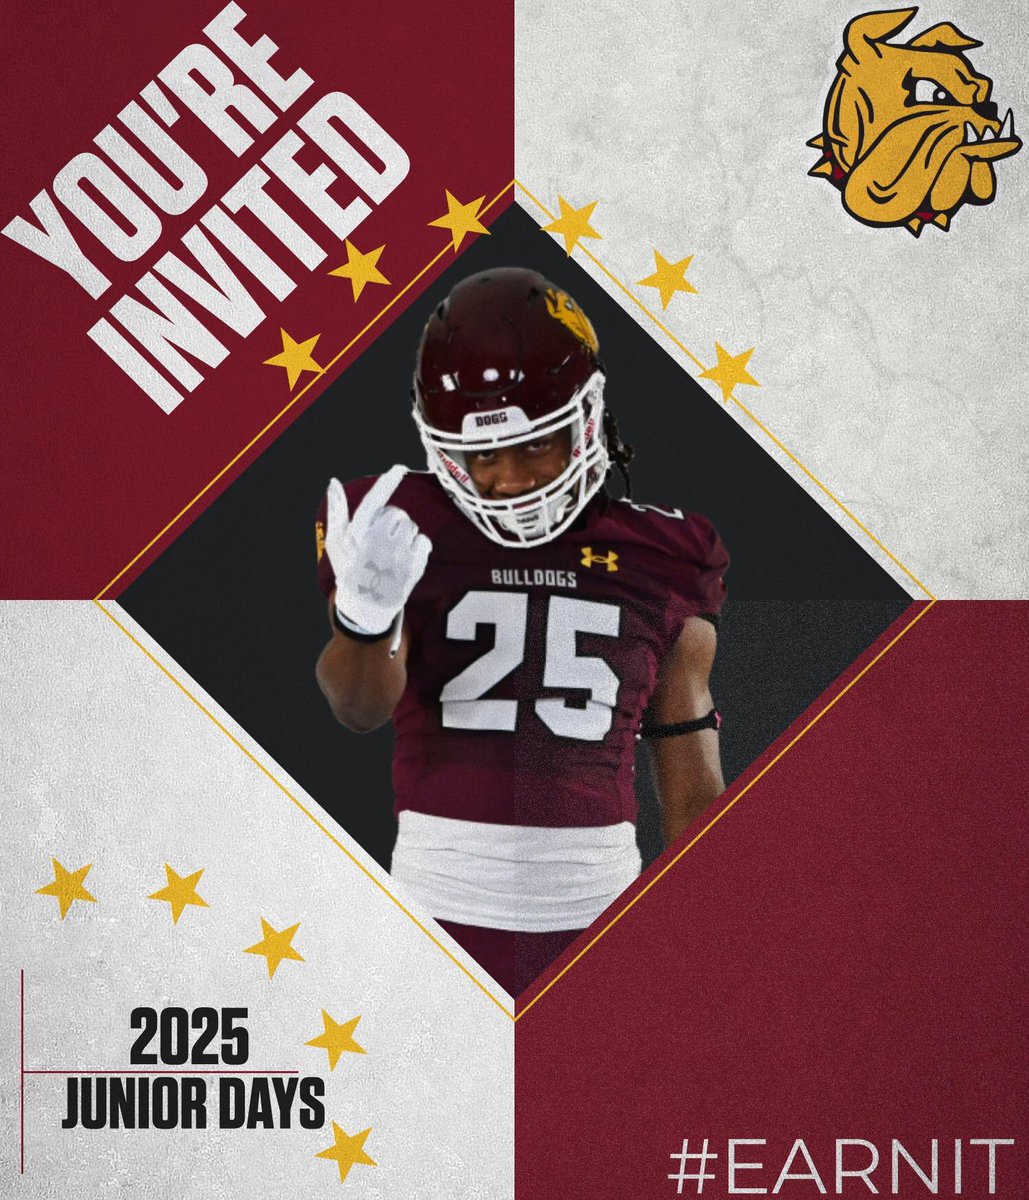 Thank you @CoachLukeOlson for inviting me to the @UMD_Football Junior day! I can’t wait to come down and visit!! @EdinaFBRecruits @EHSHornetsFB